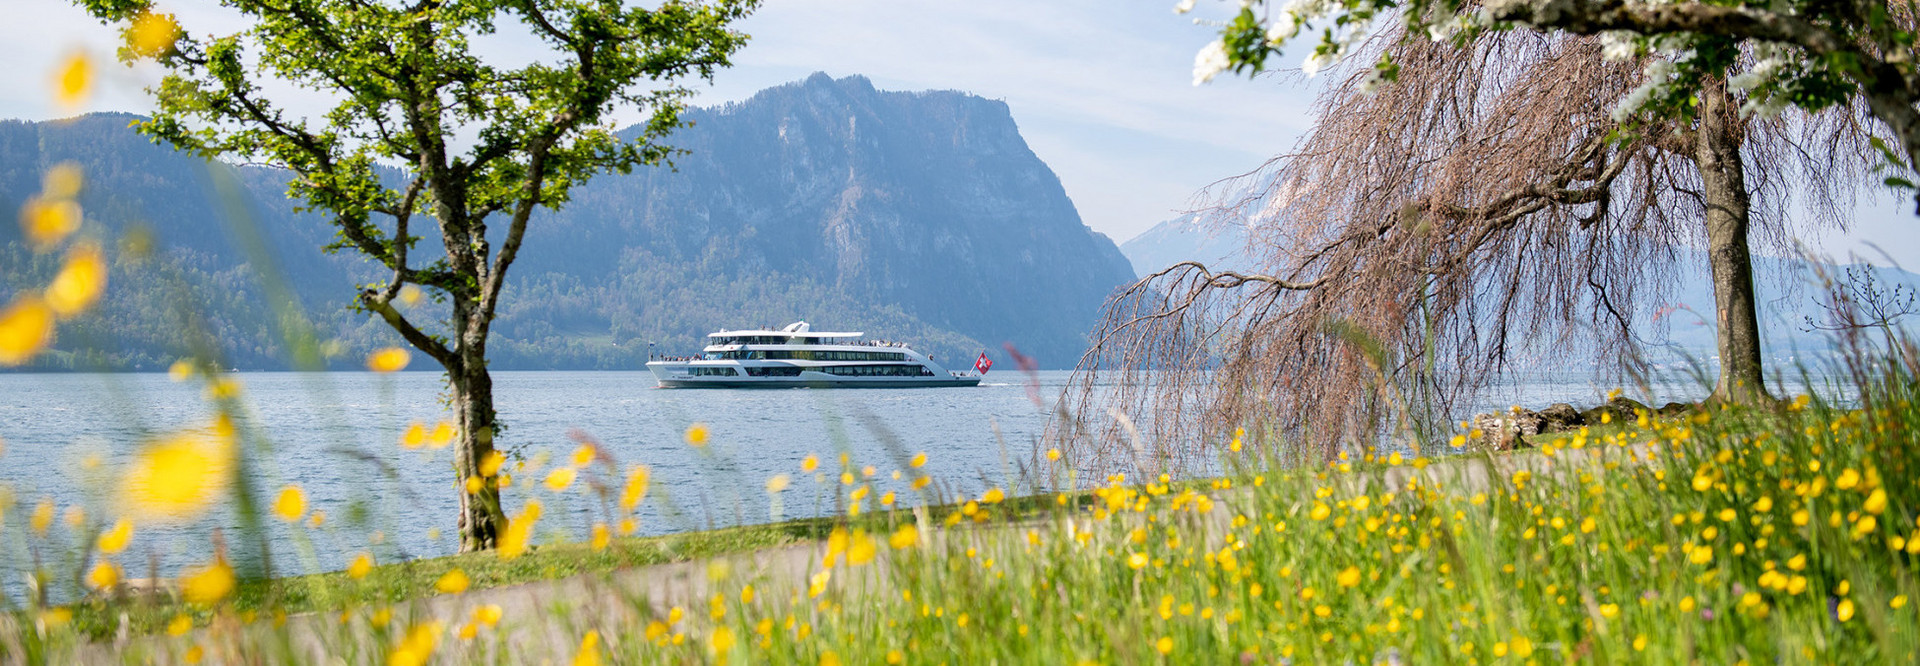 Springtime on Lake Lucerne - You can see the motor boat Diamant from the springtime shore on Lake Lucerne.